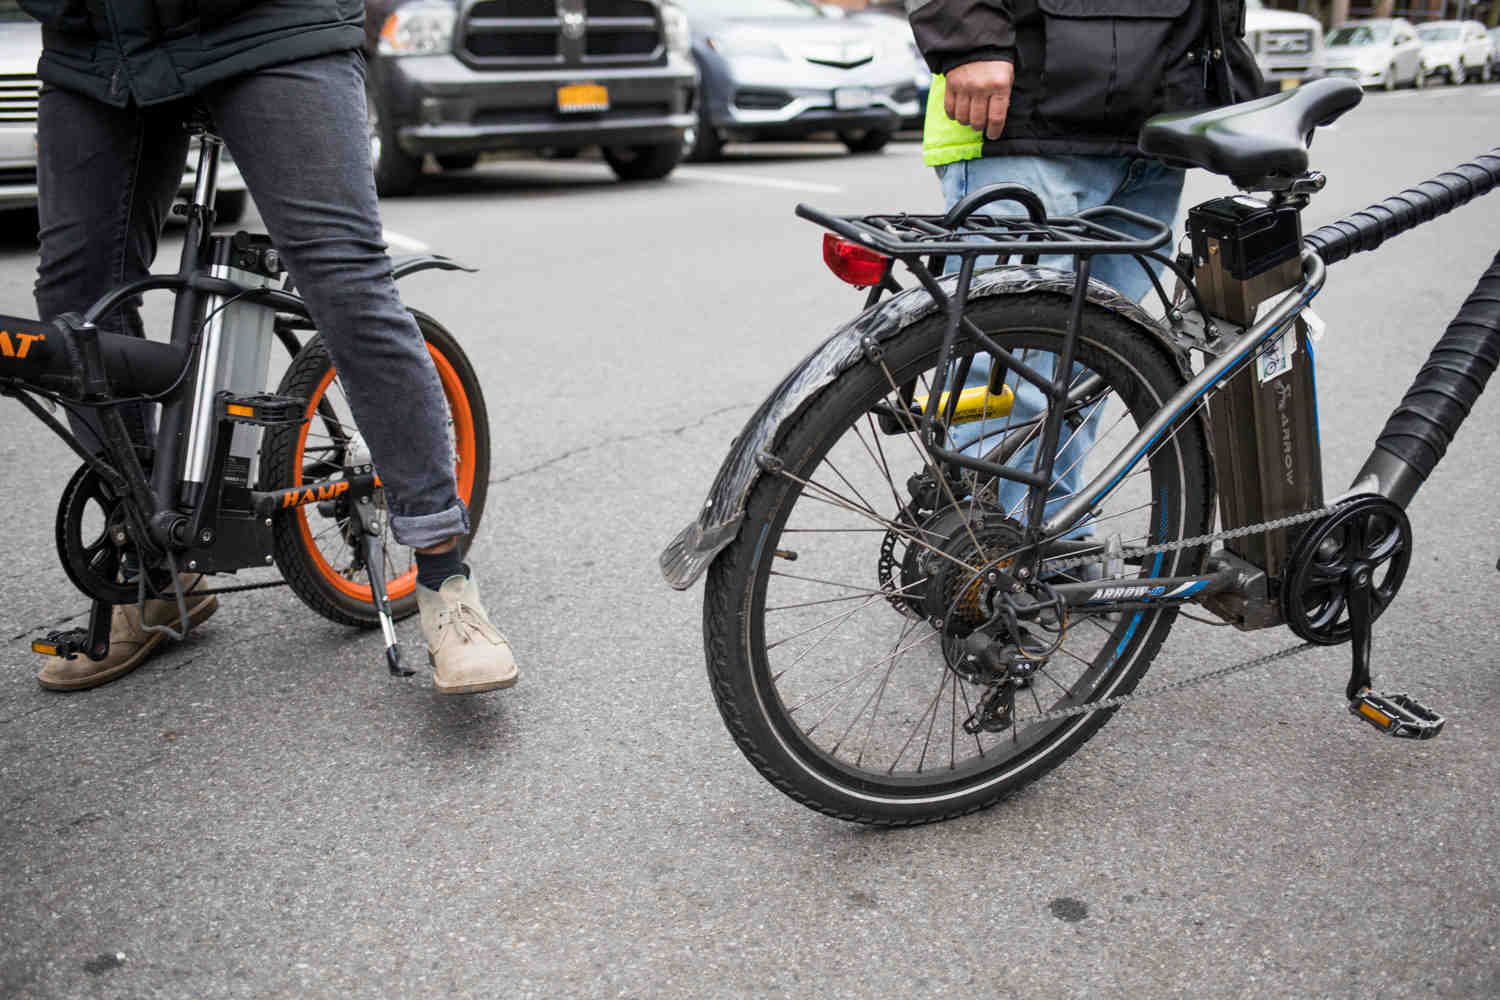 Are Ebikes street legal?